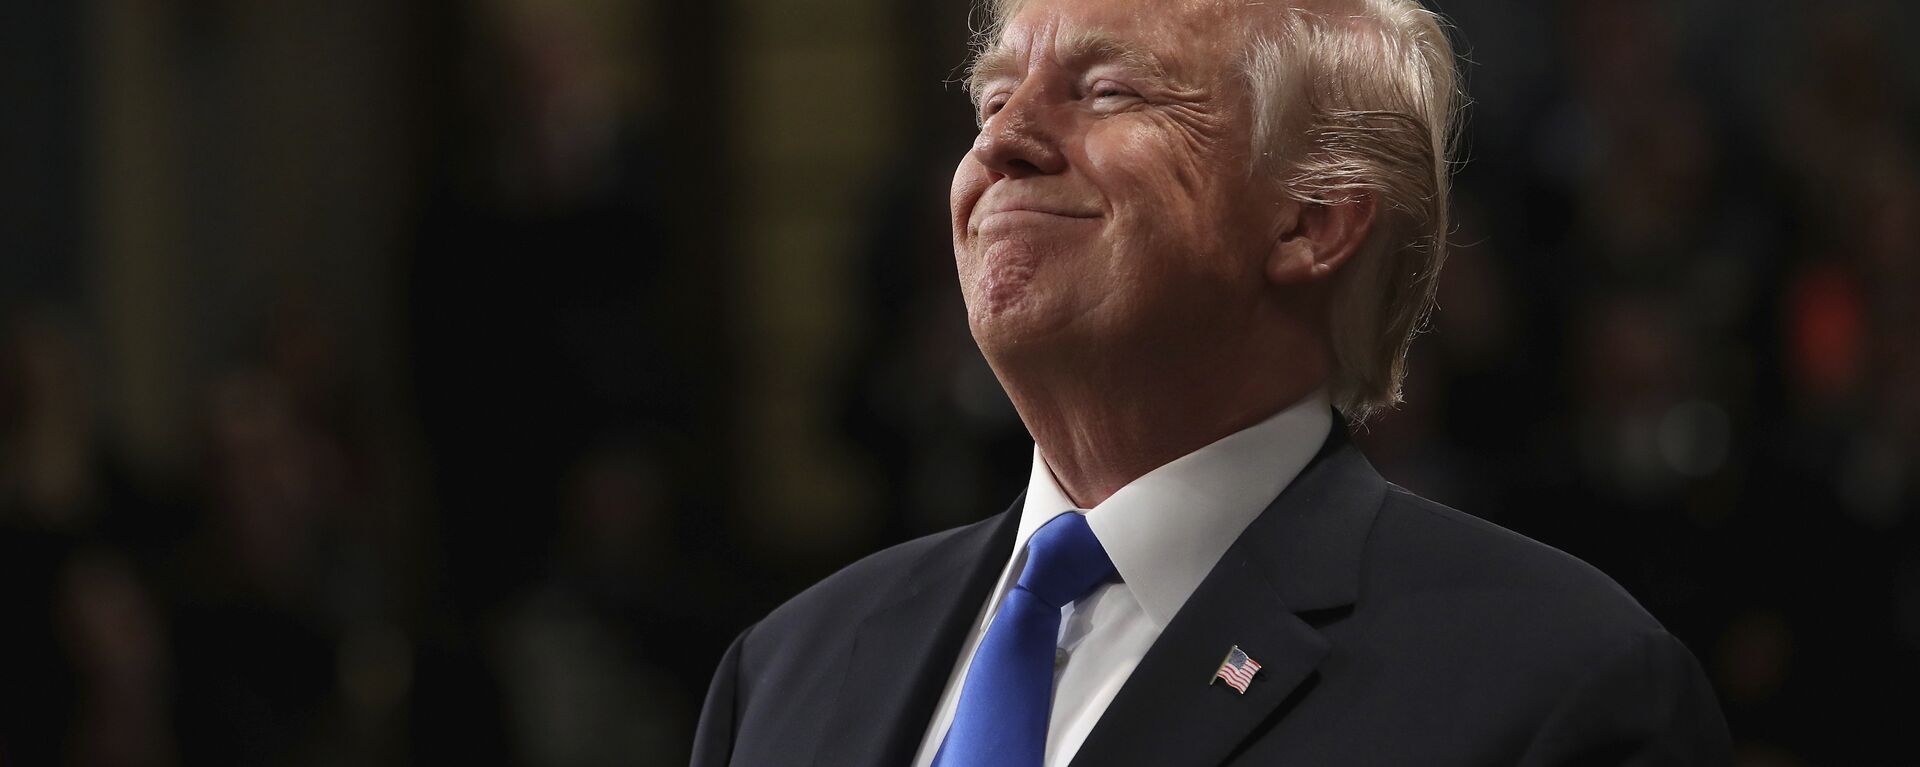 President Donald Trump smiles during State of the Union address in the House chamber of the U.S. Capitol to a joint session of Congress Tuesday, Jan. 30, 2018 in Washington - Sputnik International, 1920, 02.02.2021